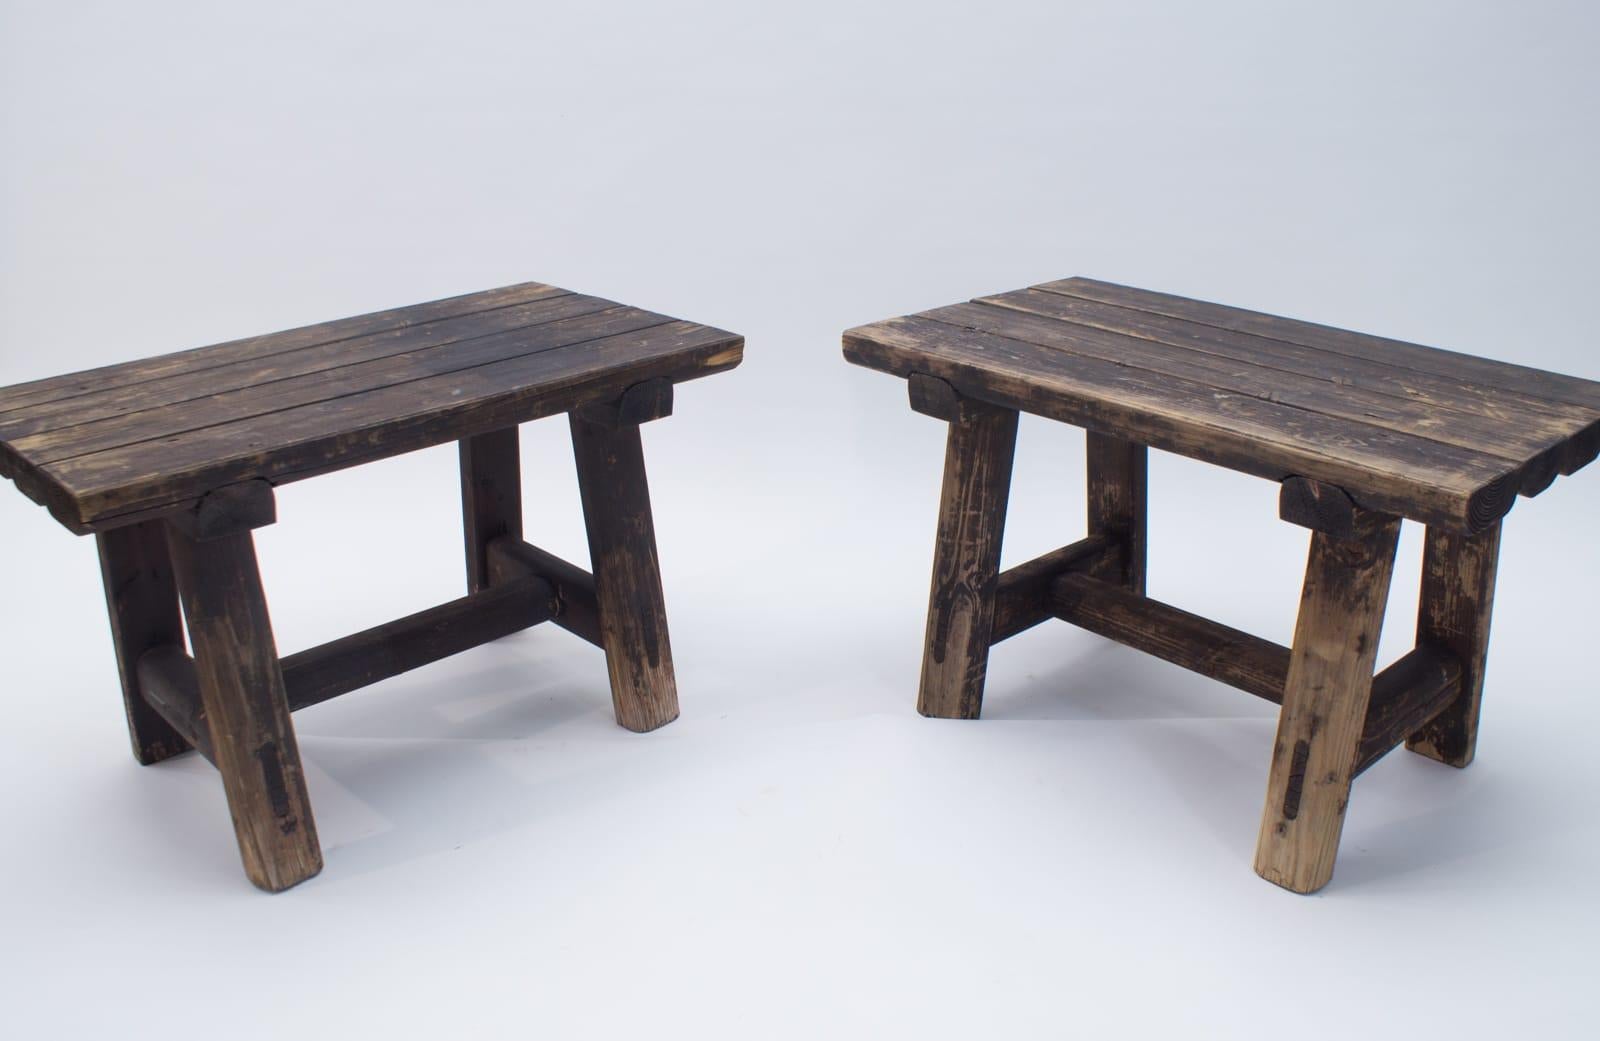 Black Forest Wooden Bench, 1930s-1940s Germany 10